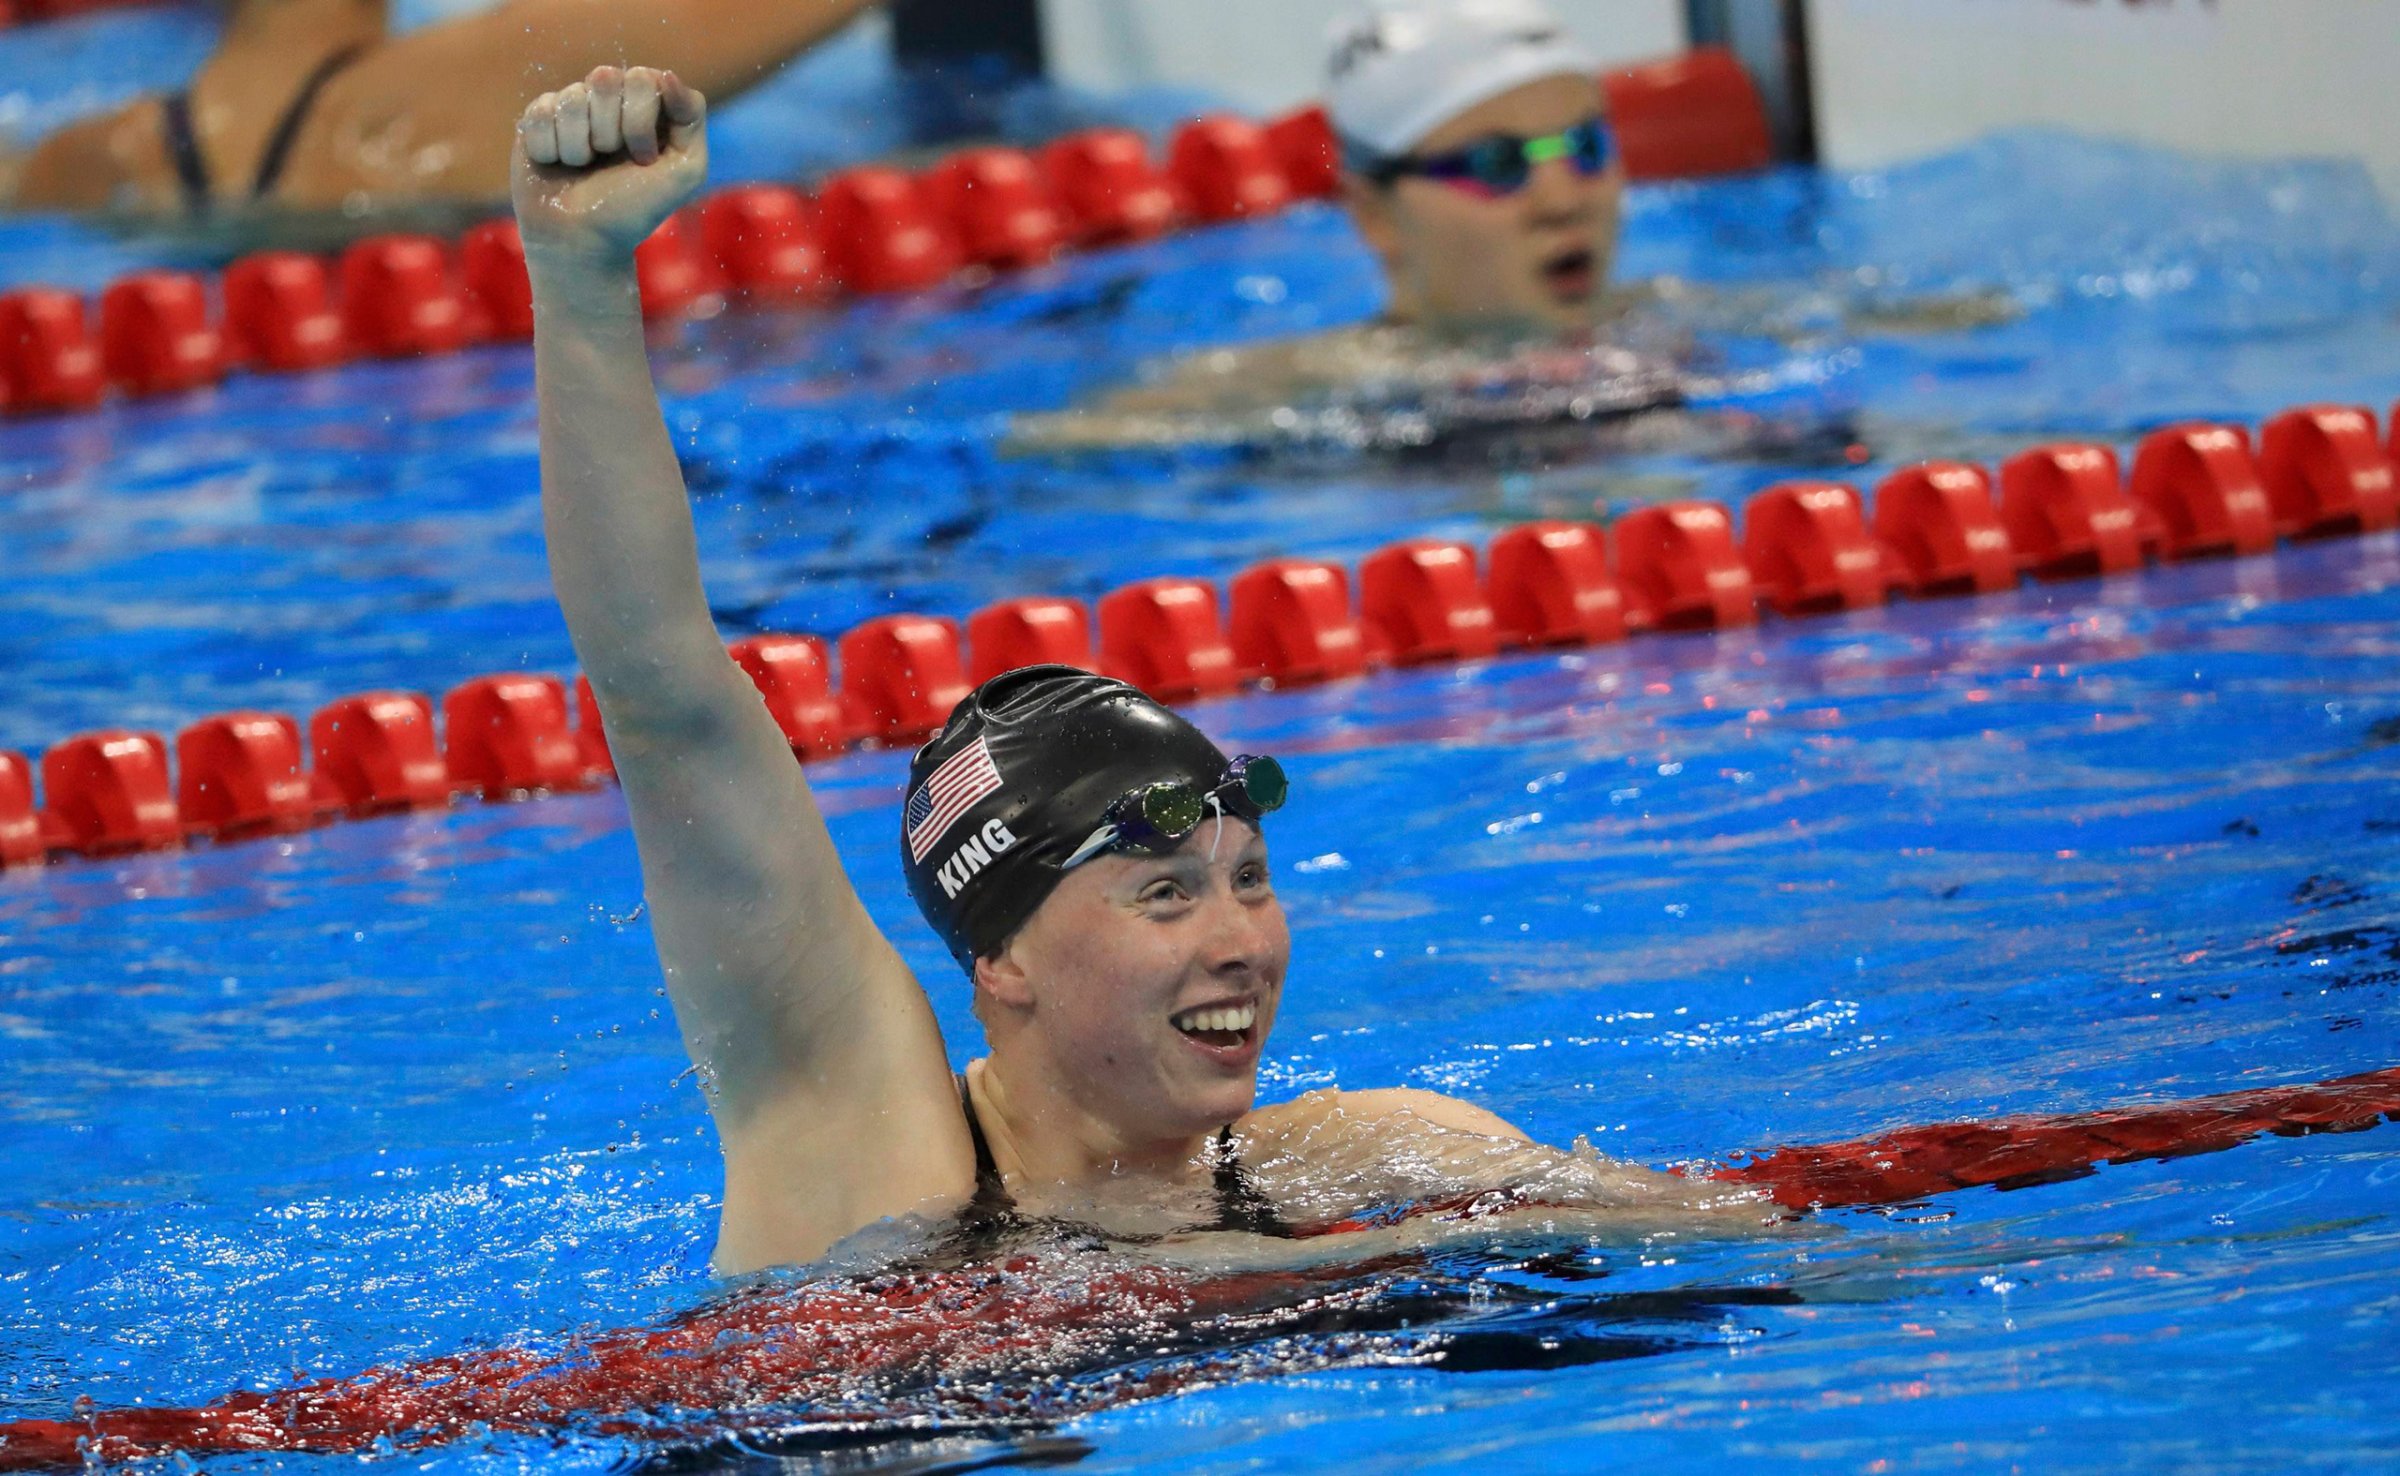 2016 Rio Olympics - Swimming - Final - Women's 100m Breaststroke Final - Olympic Aquatics Stadium - Rio de Janeiro, Brazil - 08/08/2016. Lilly King (USA) of USA reacts after winning the gold medal. REUTERS/Dominic Ebenbichler FOR EDITORIAL USE ONLY. NOT FOR SALE FOR MARKETING OR ADVERTISING CAMPAIGNS. - RTSLZ3G